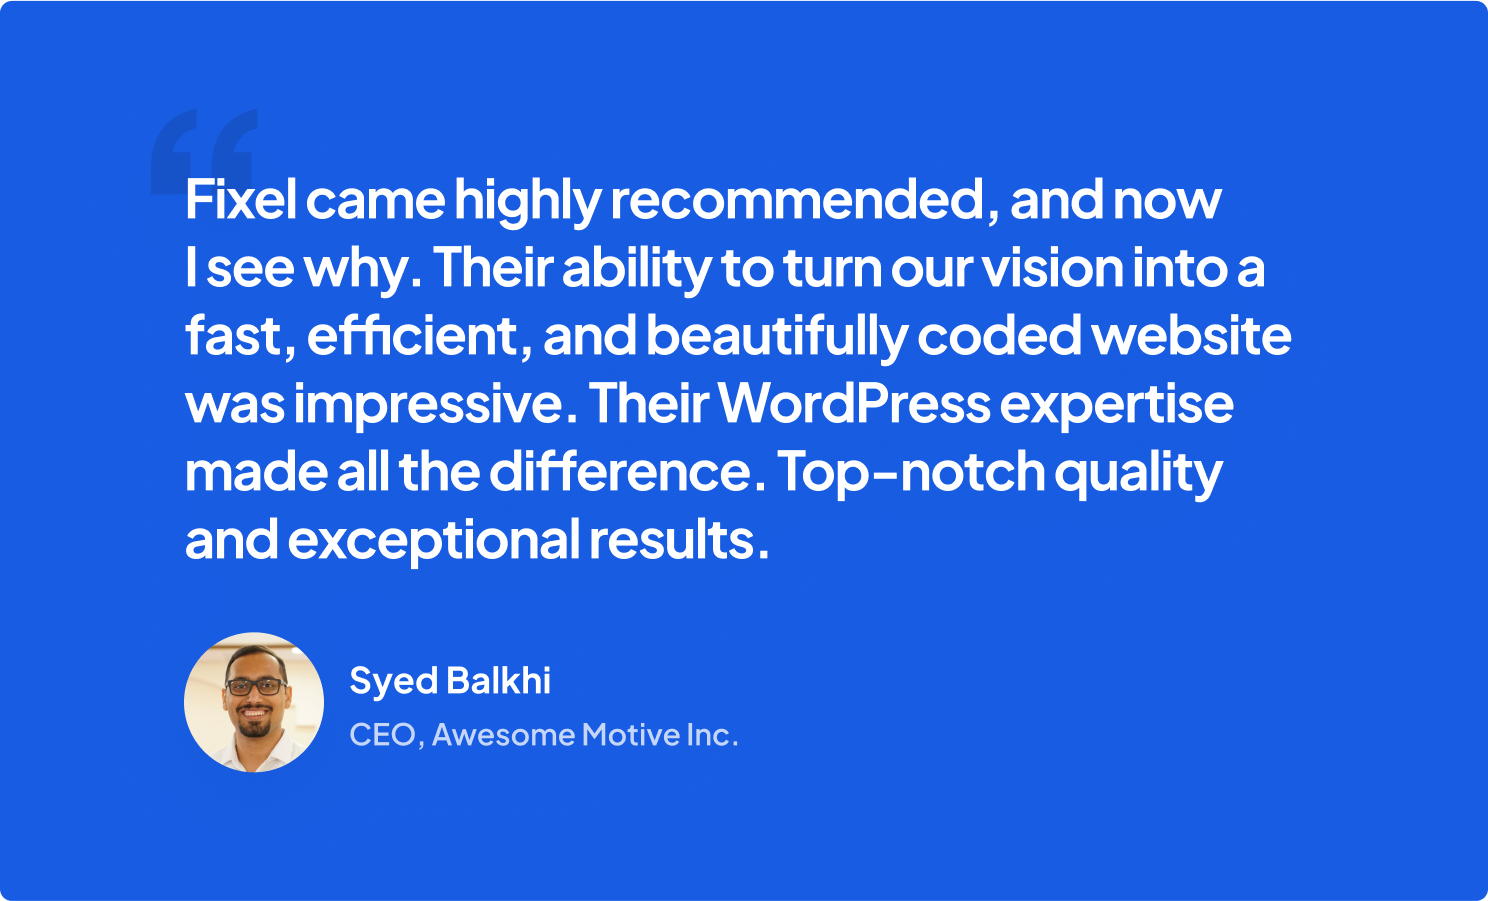 “Fixel’s ability to turn our vision into a fast, efficient, and beautifully coded website was impressive. Their WordPress expertise made all the difference. Top-notch quality and exceptional results.”— Syed Balkhi, CEO, Awesome Motive Inc.